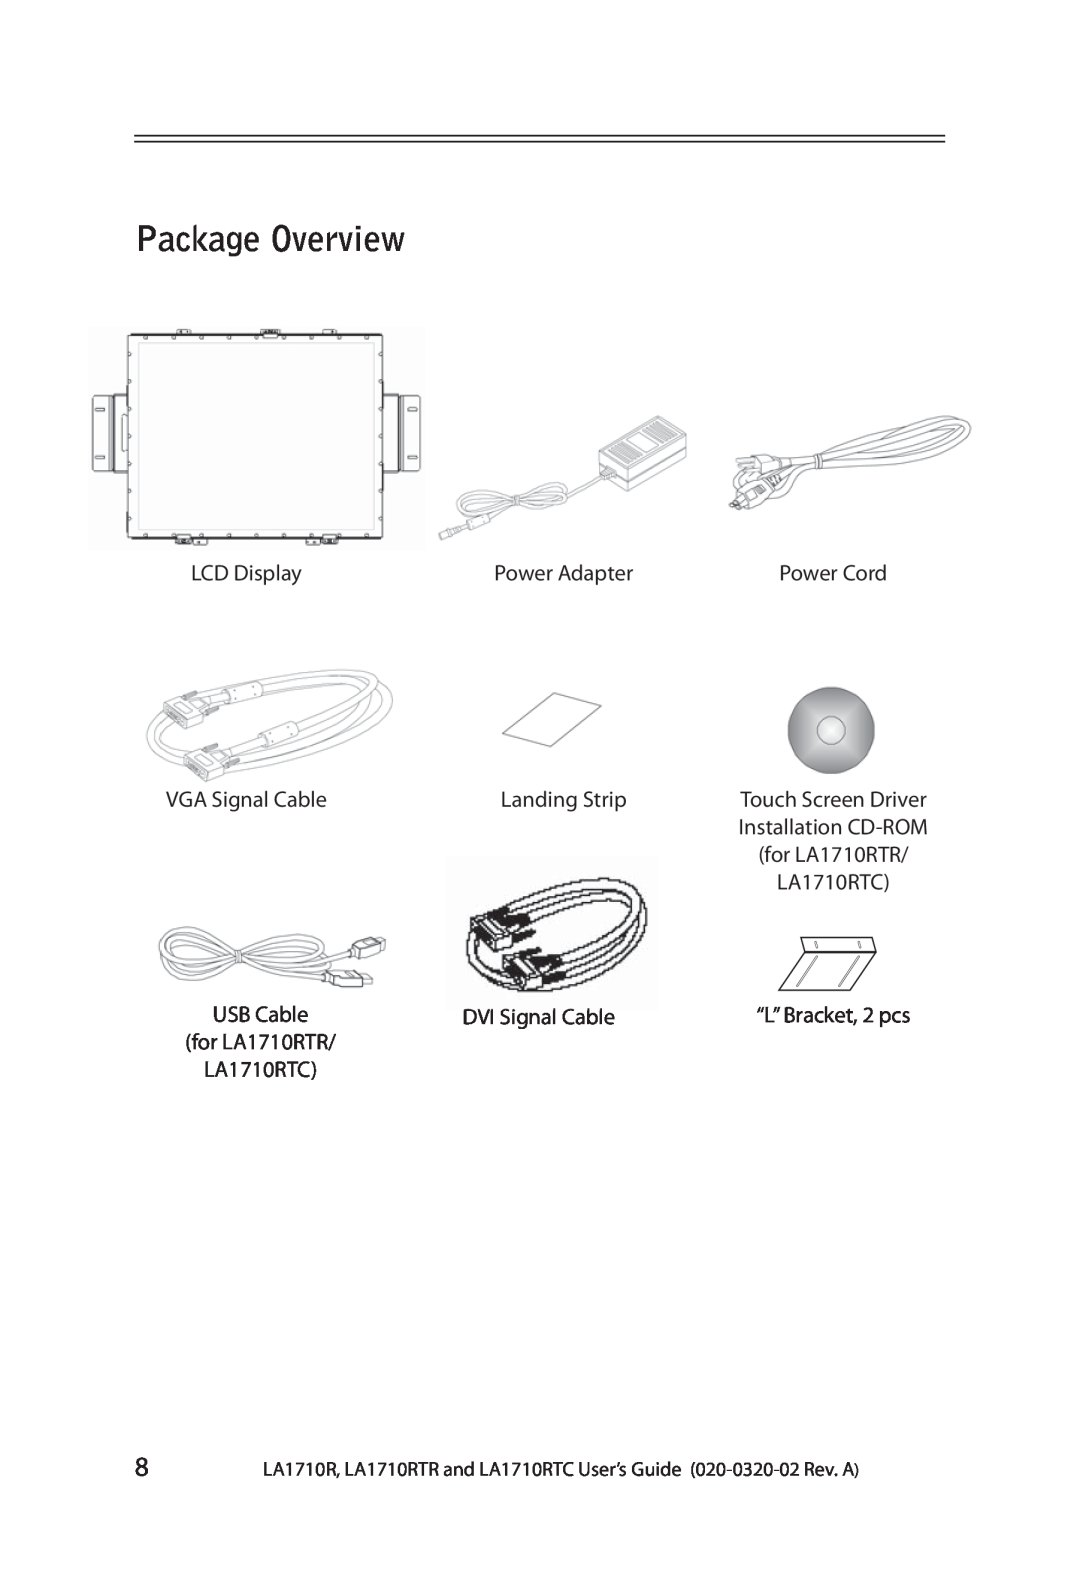 Planar LA1710RTC manual Package Overview, Power Cord, Touch Screen Driver, Installation CD-ROM, USB Cable, for LA1710RTR 